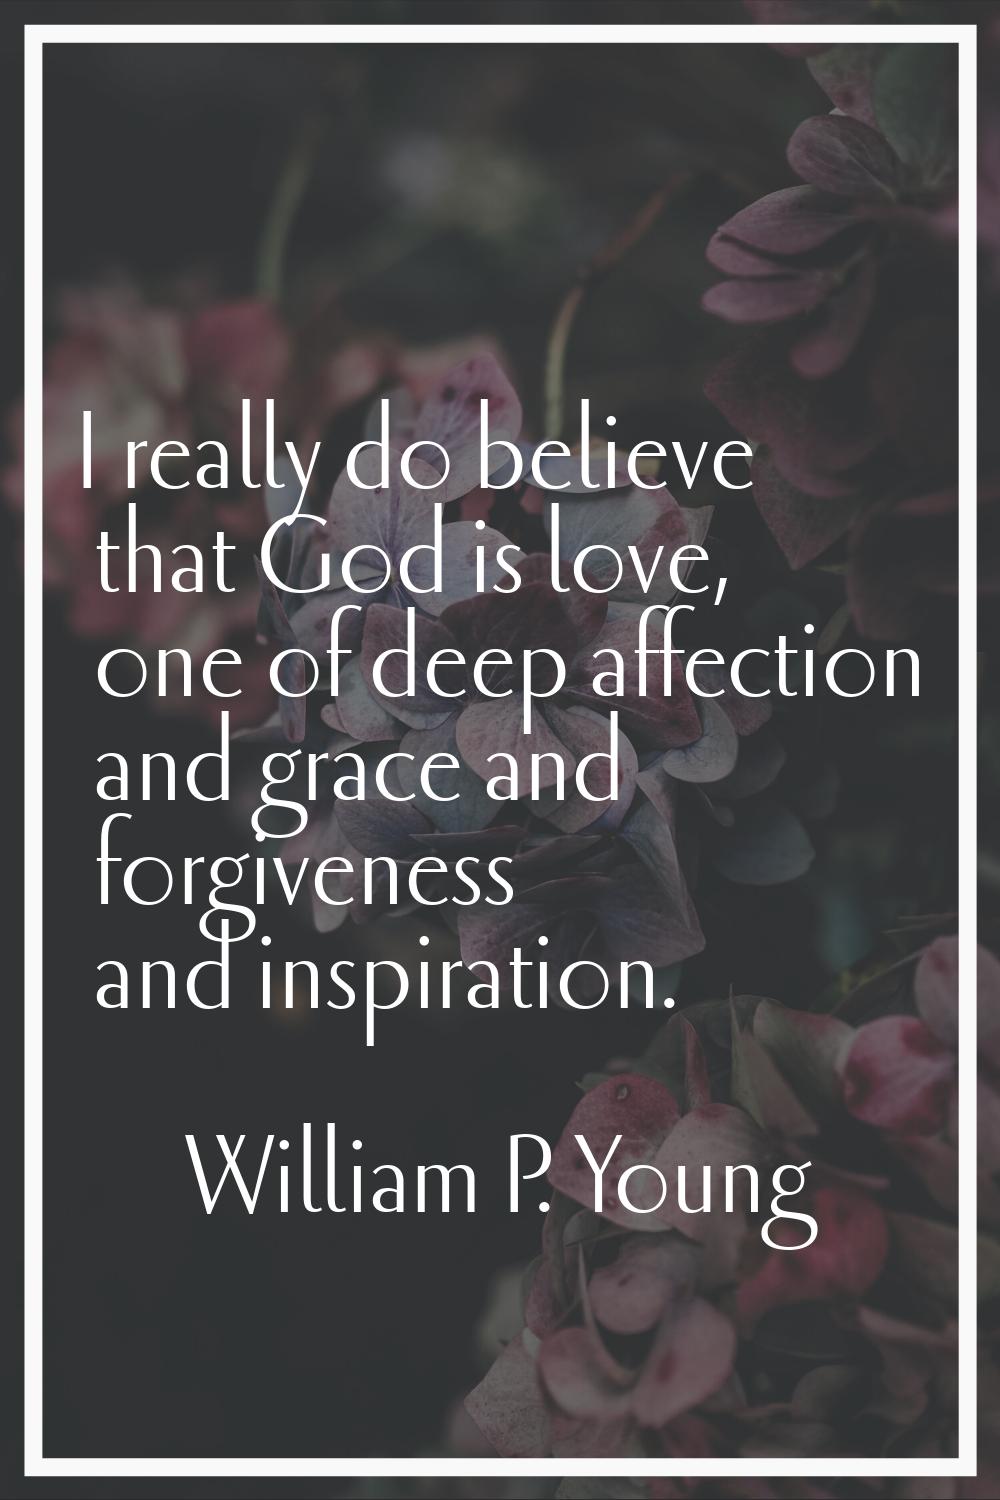 I really do believe that God is love, one of deep affection and grace and forgiveness and inspirati